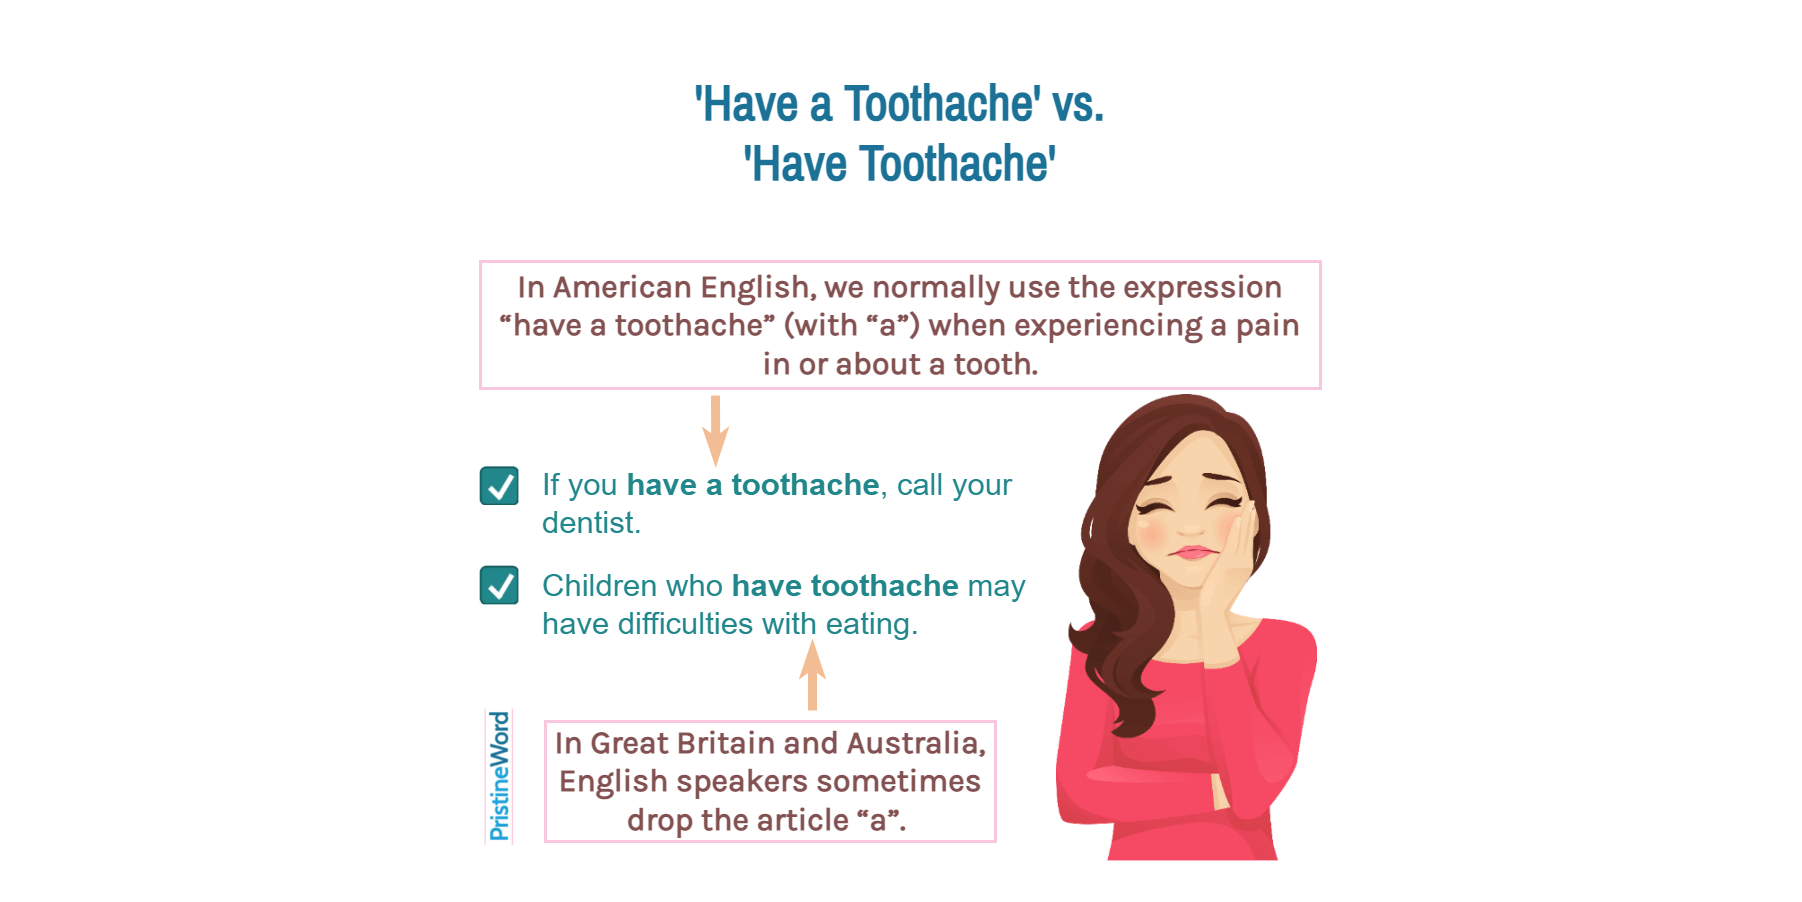 Have a toothache vs. have toothache